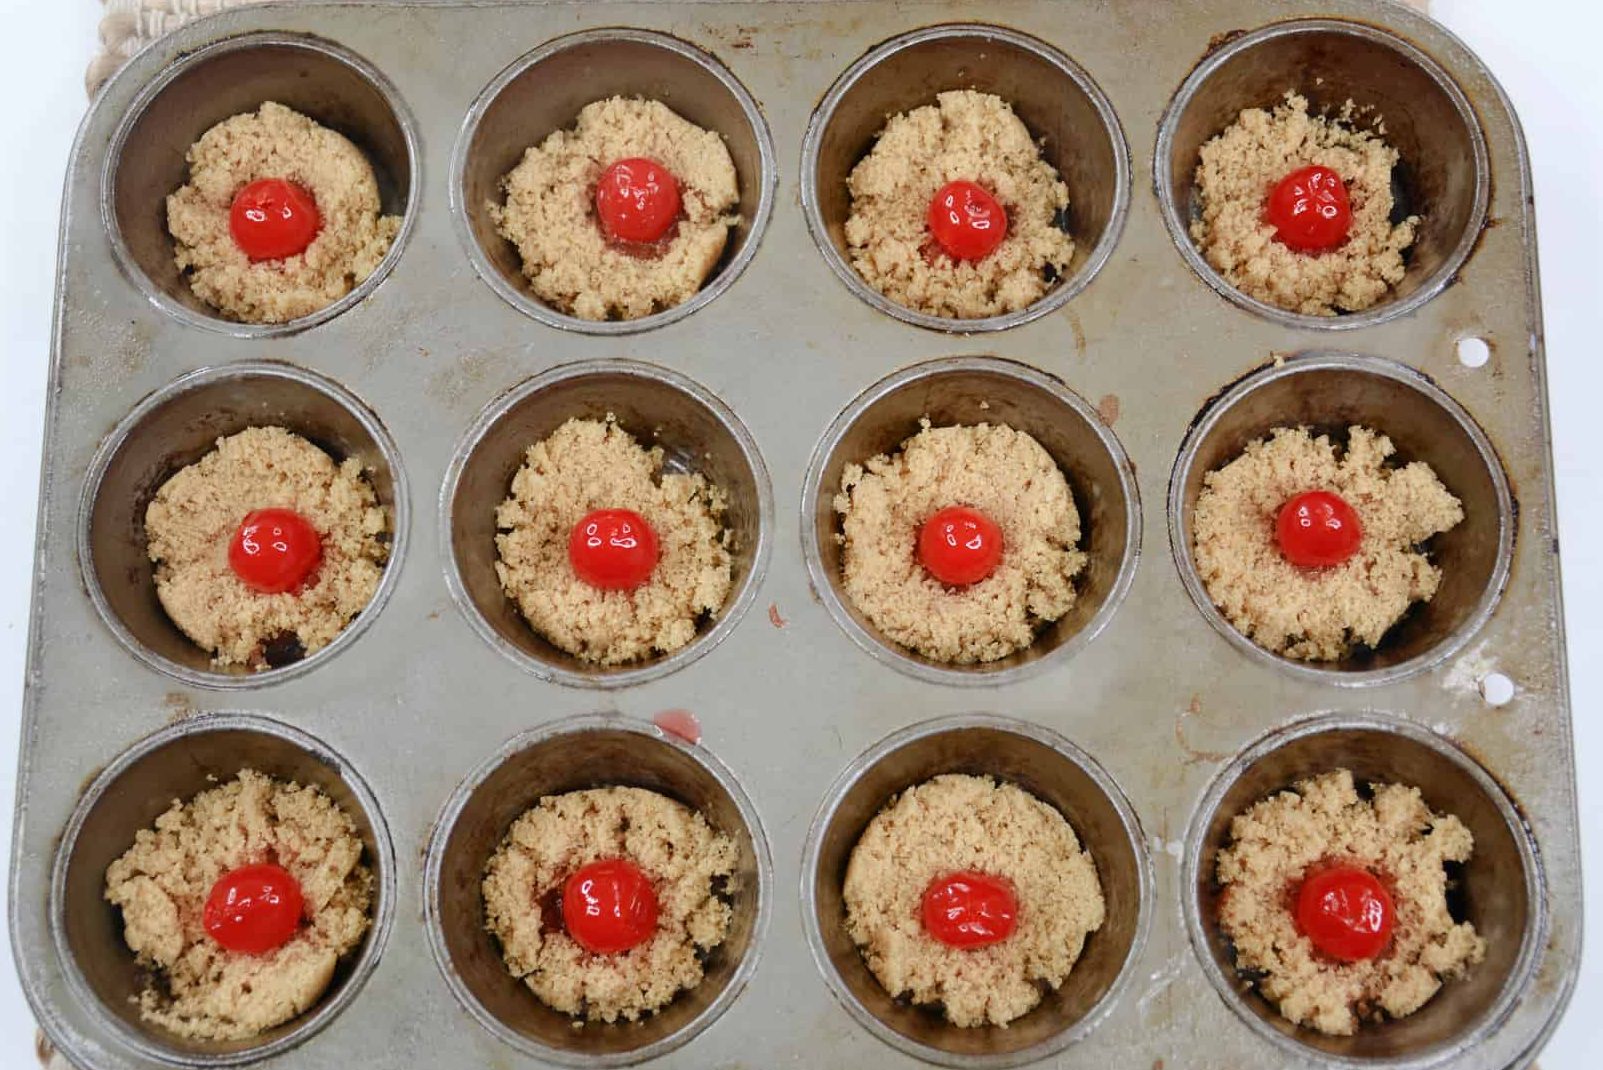 Position one maraschino cherry in the center of the light brown sugar in each of the muffin cups.